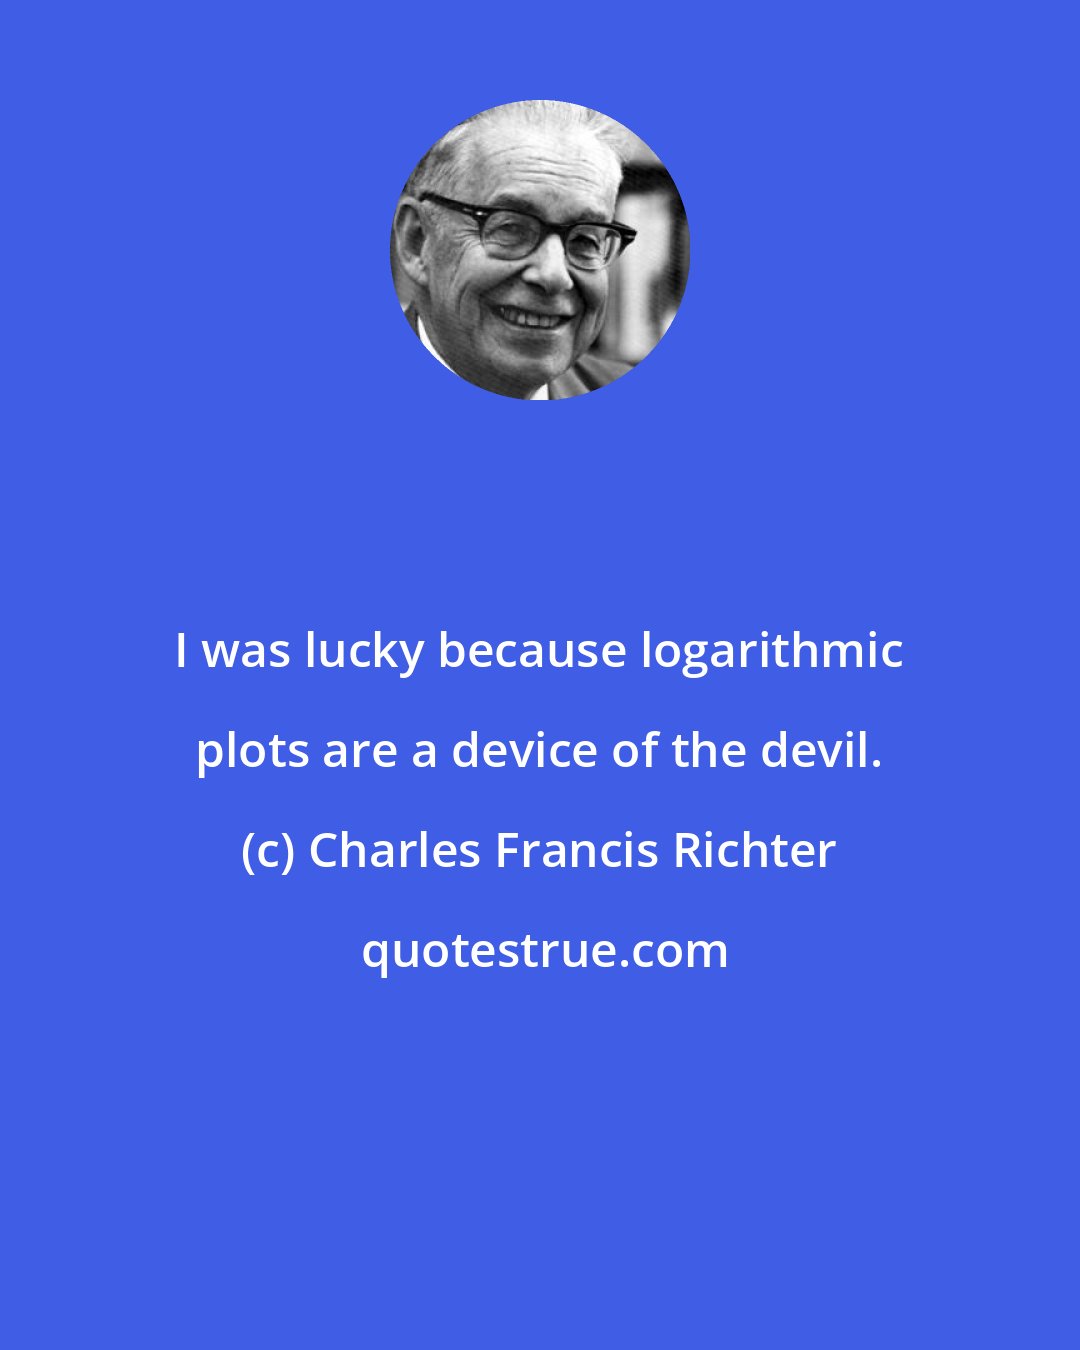 Charles Francis Richter: I was lucky because logarithmic plots are a device of the devil.